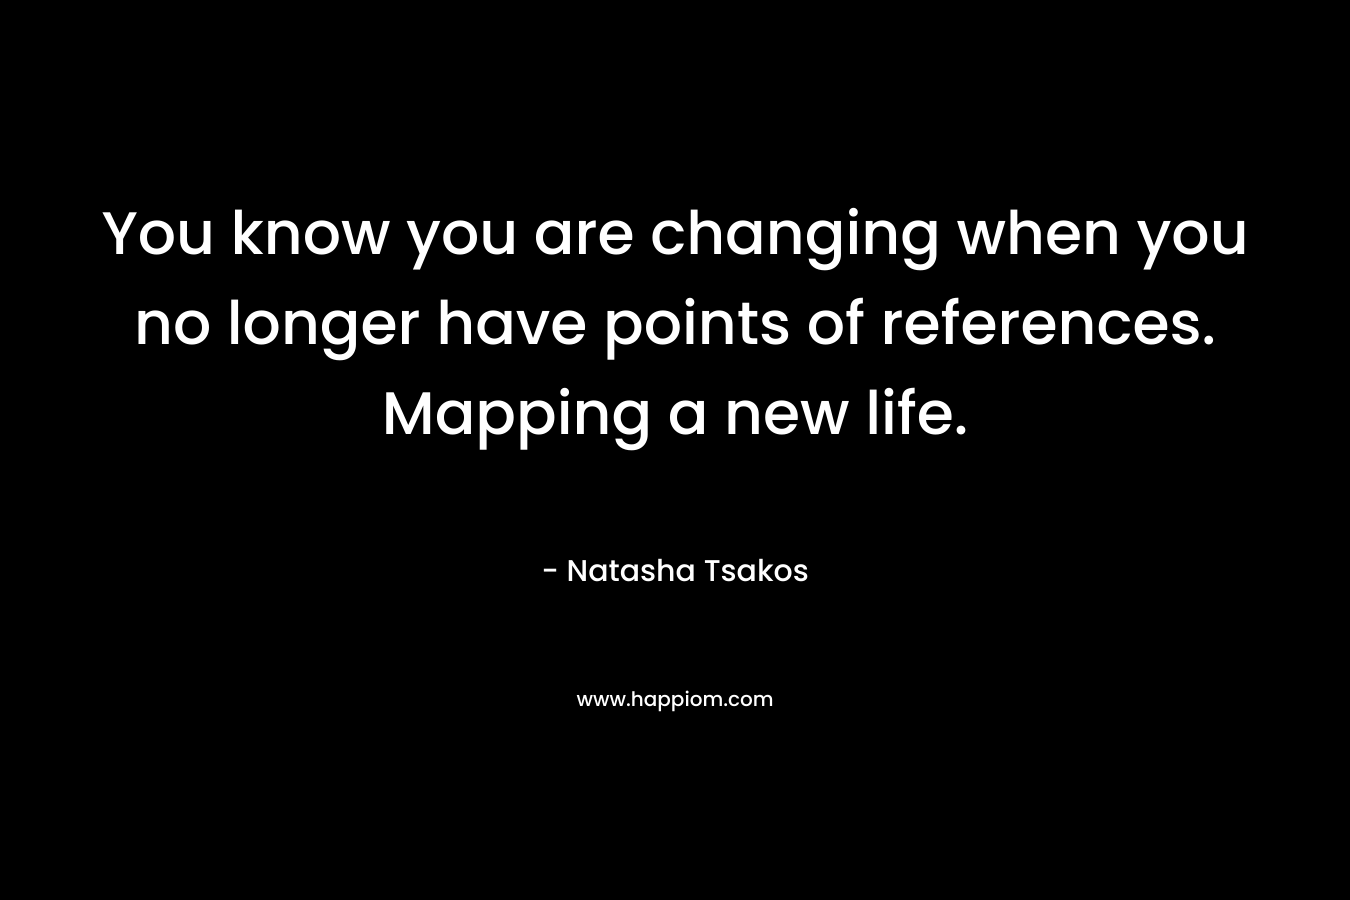 You know you are changing when you no longer have points of references. Mapping a new life.